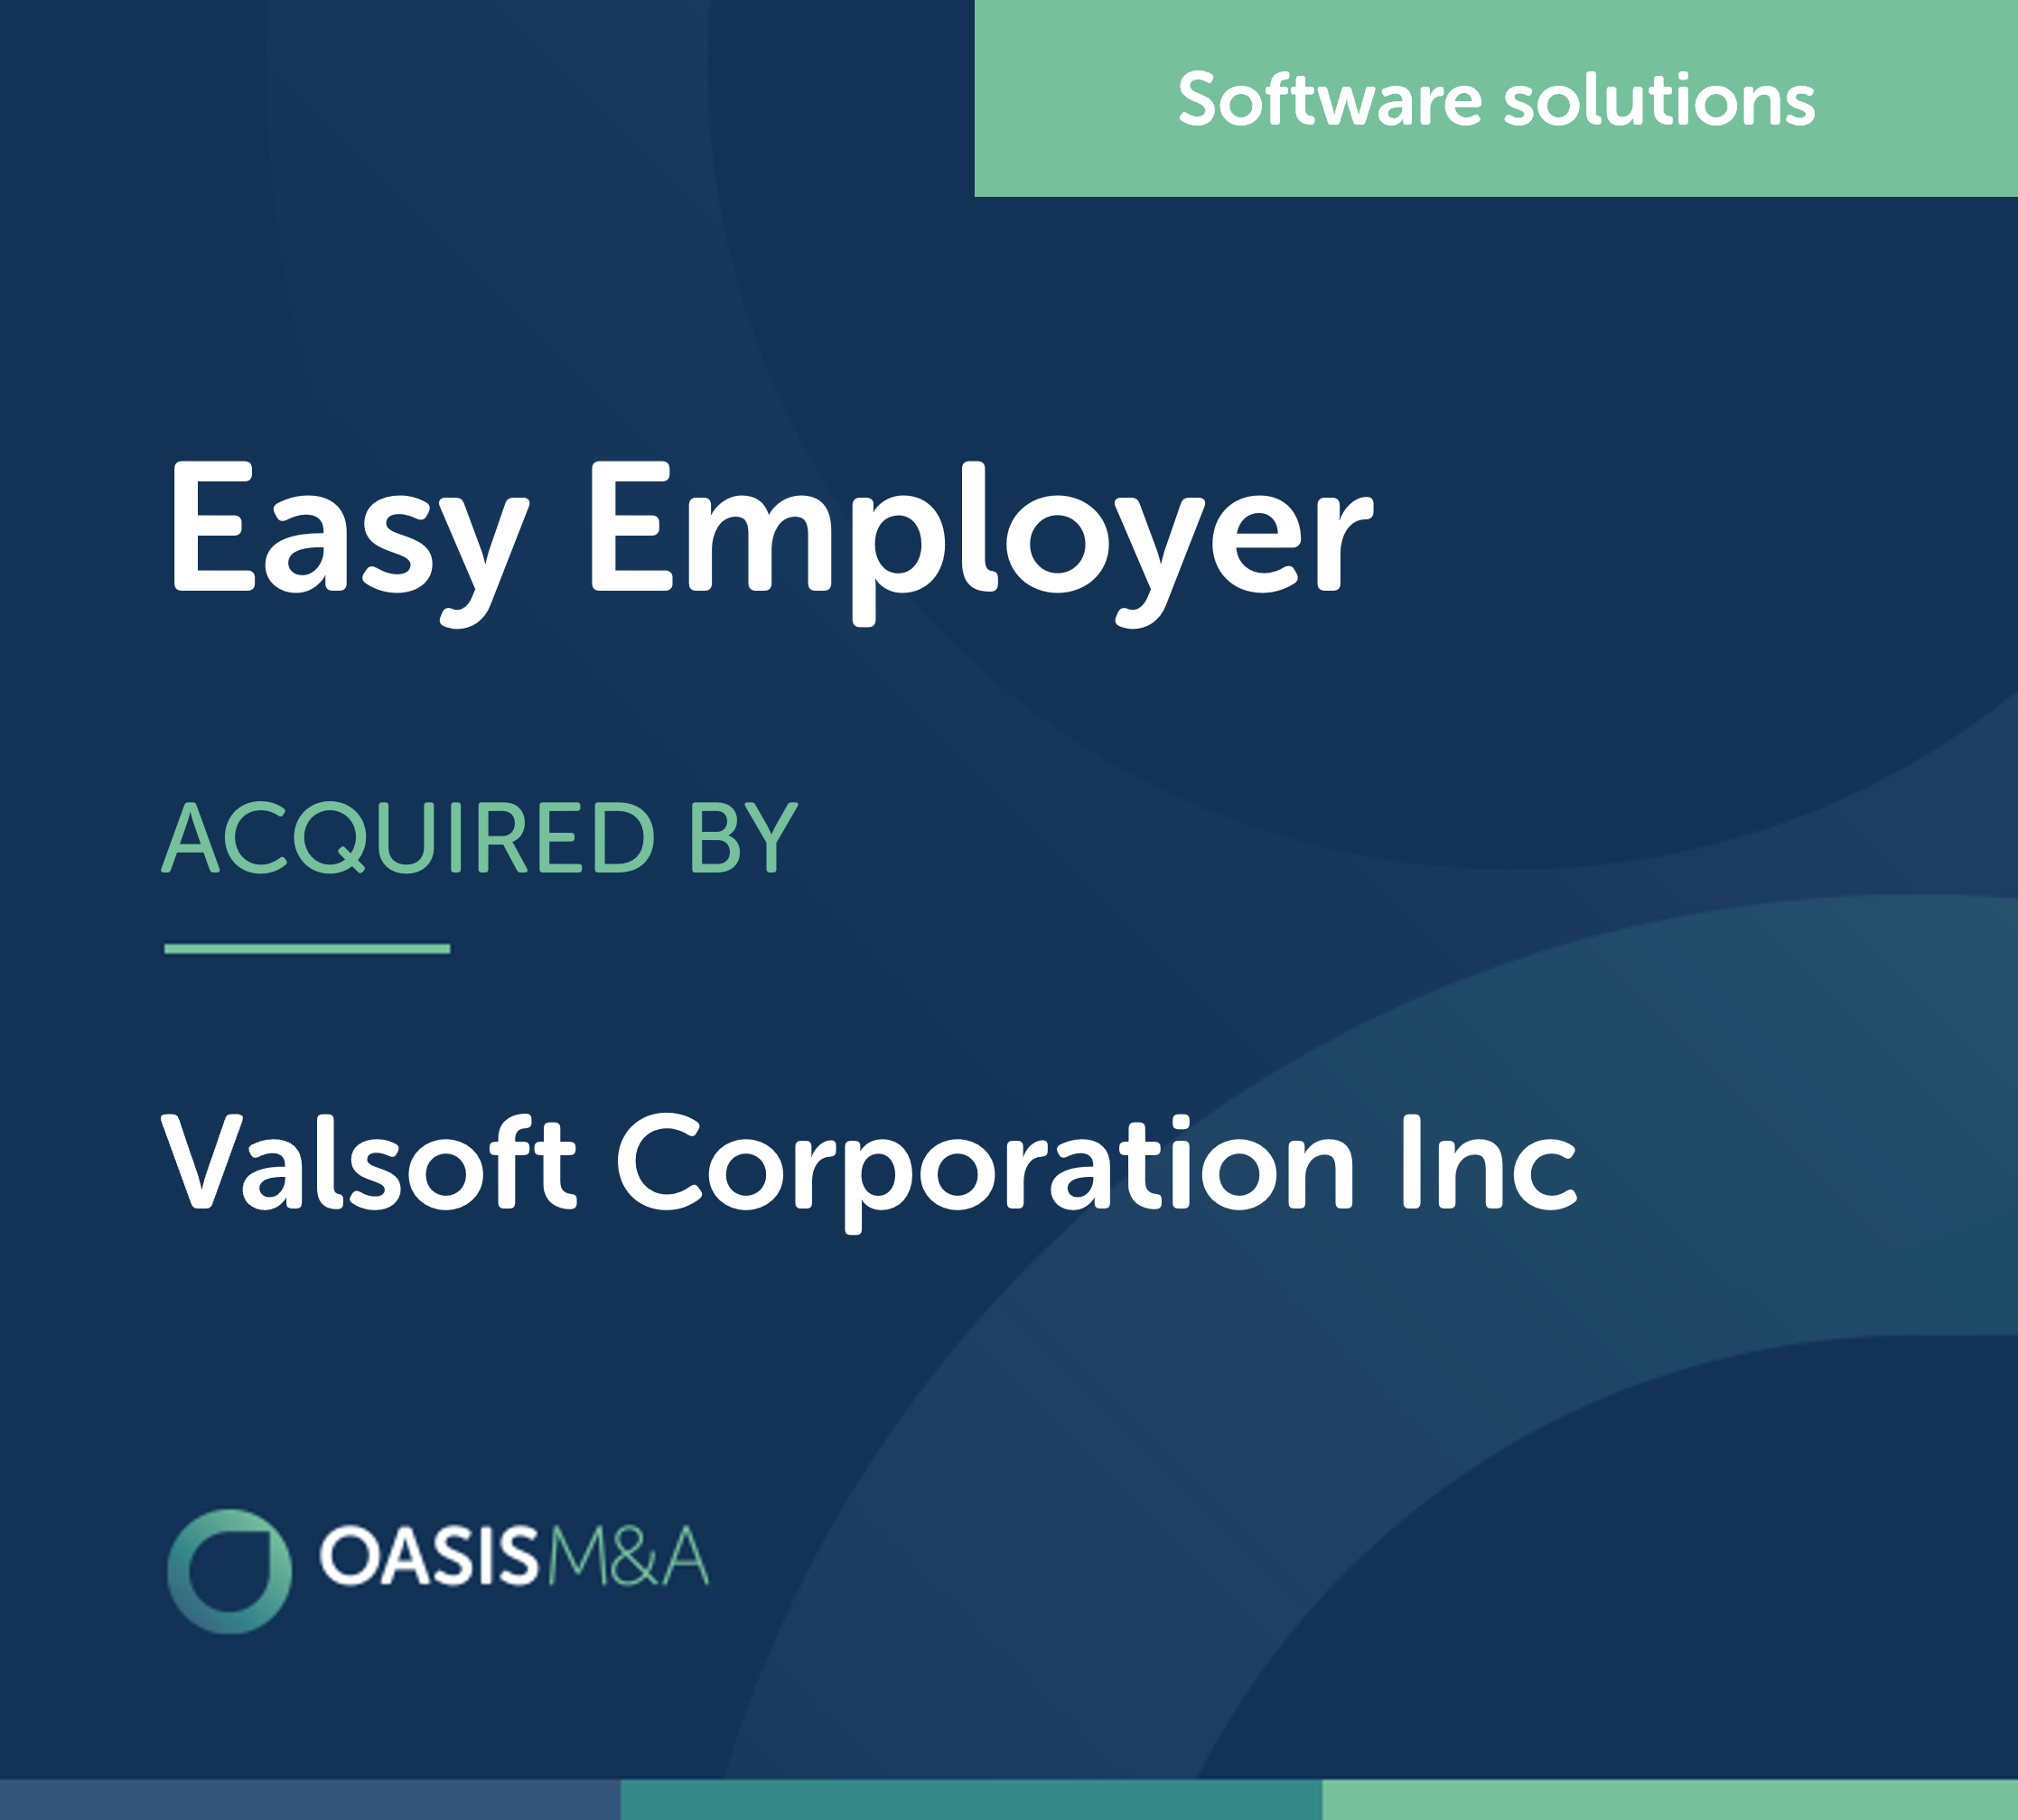 Easy Employer acquired by Valsoft Corporation Inc